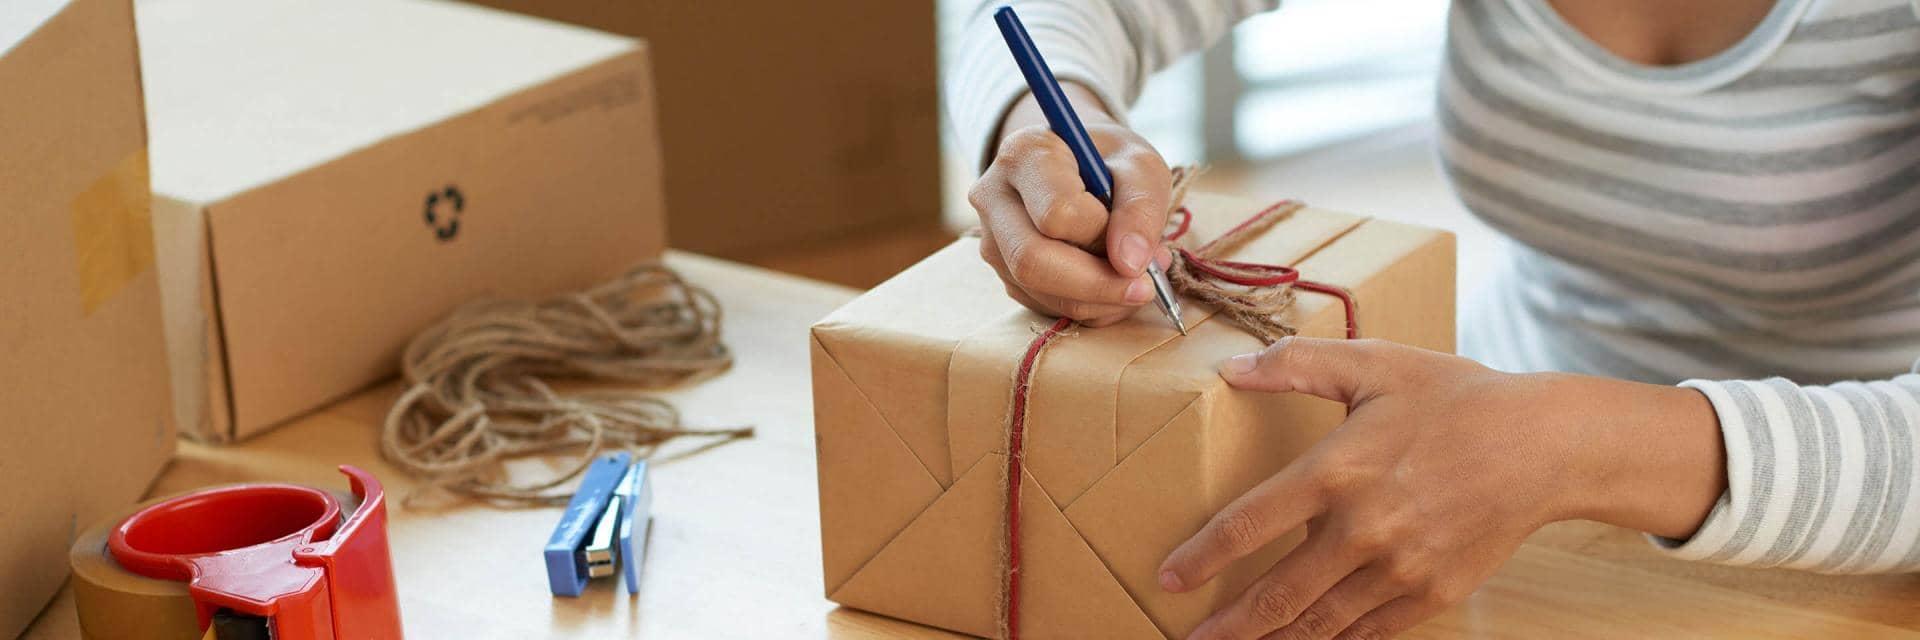 A woman writes an address on a hand wrapped brown paper parcel tied with string